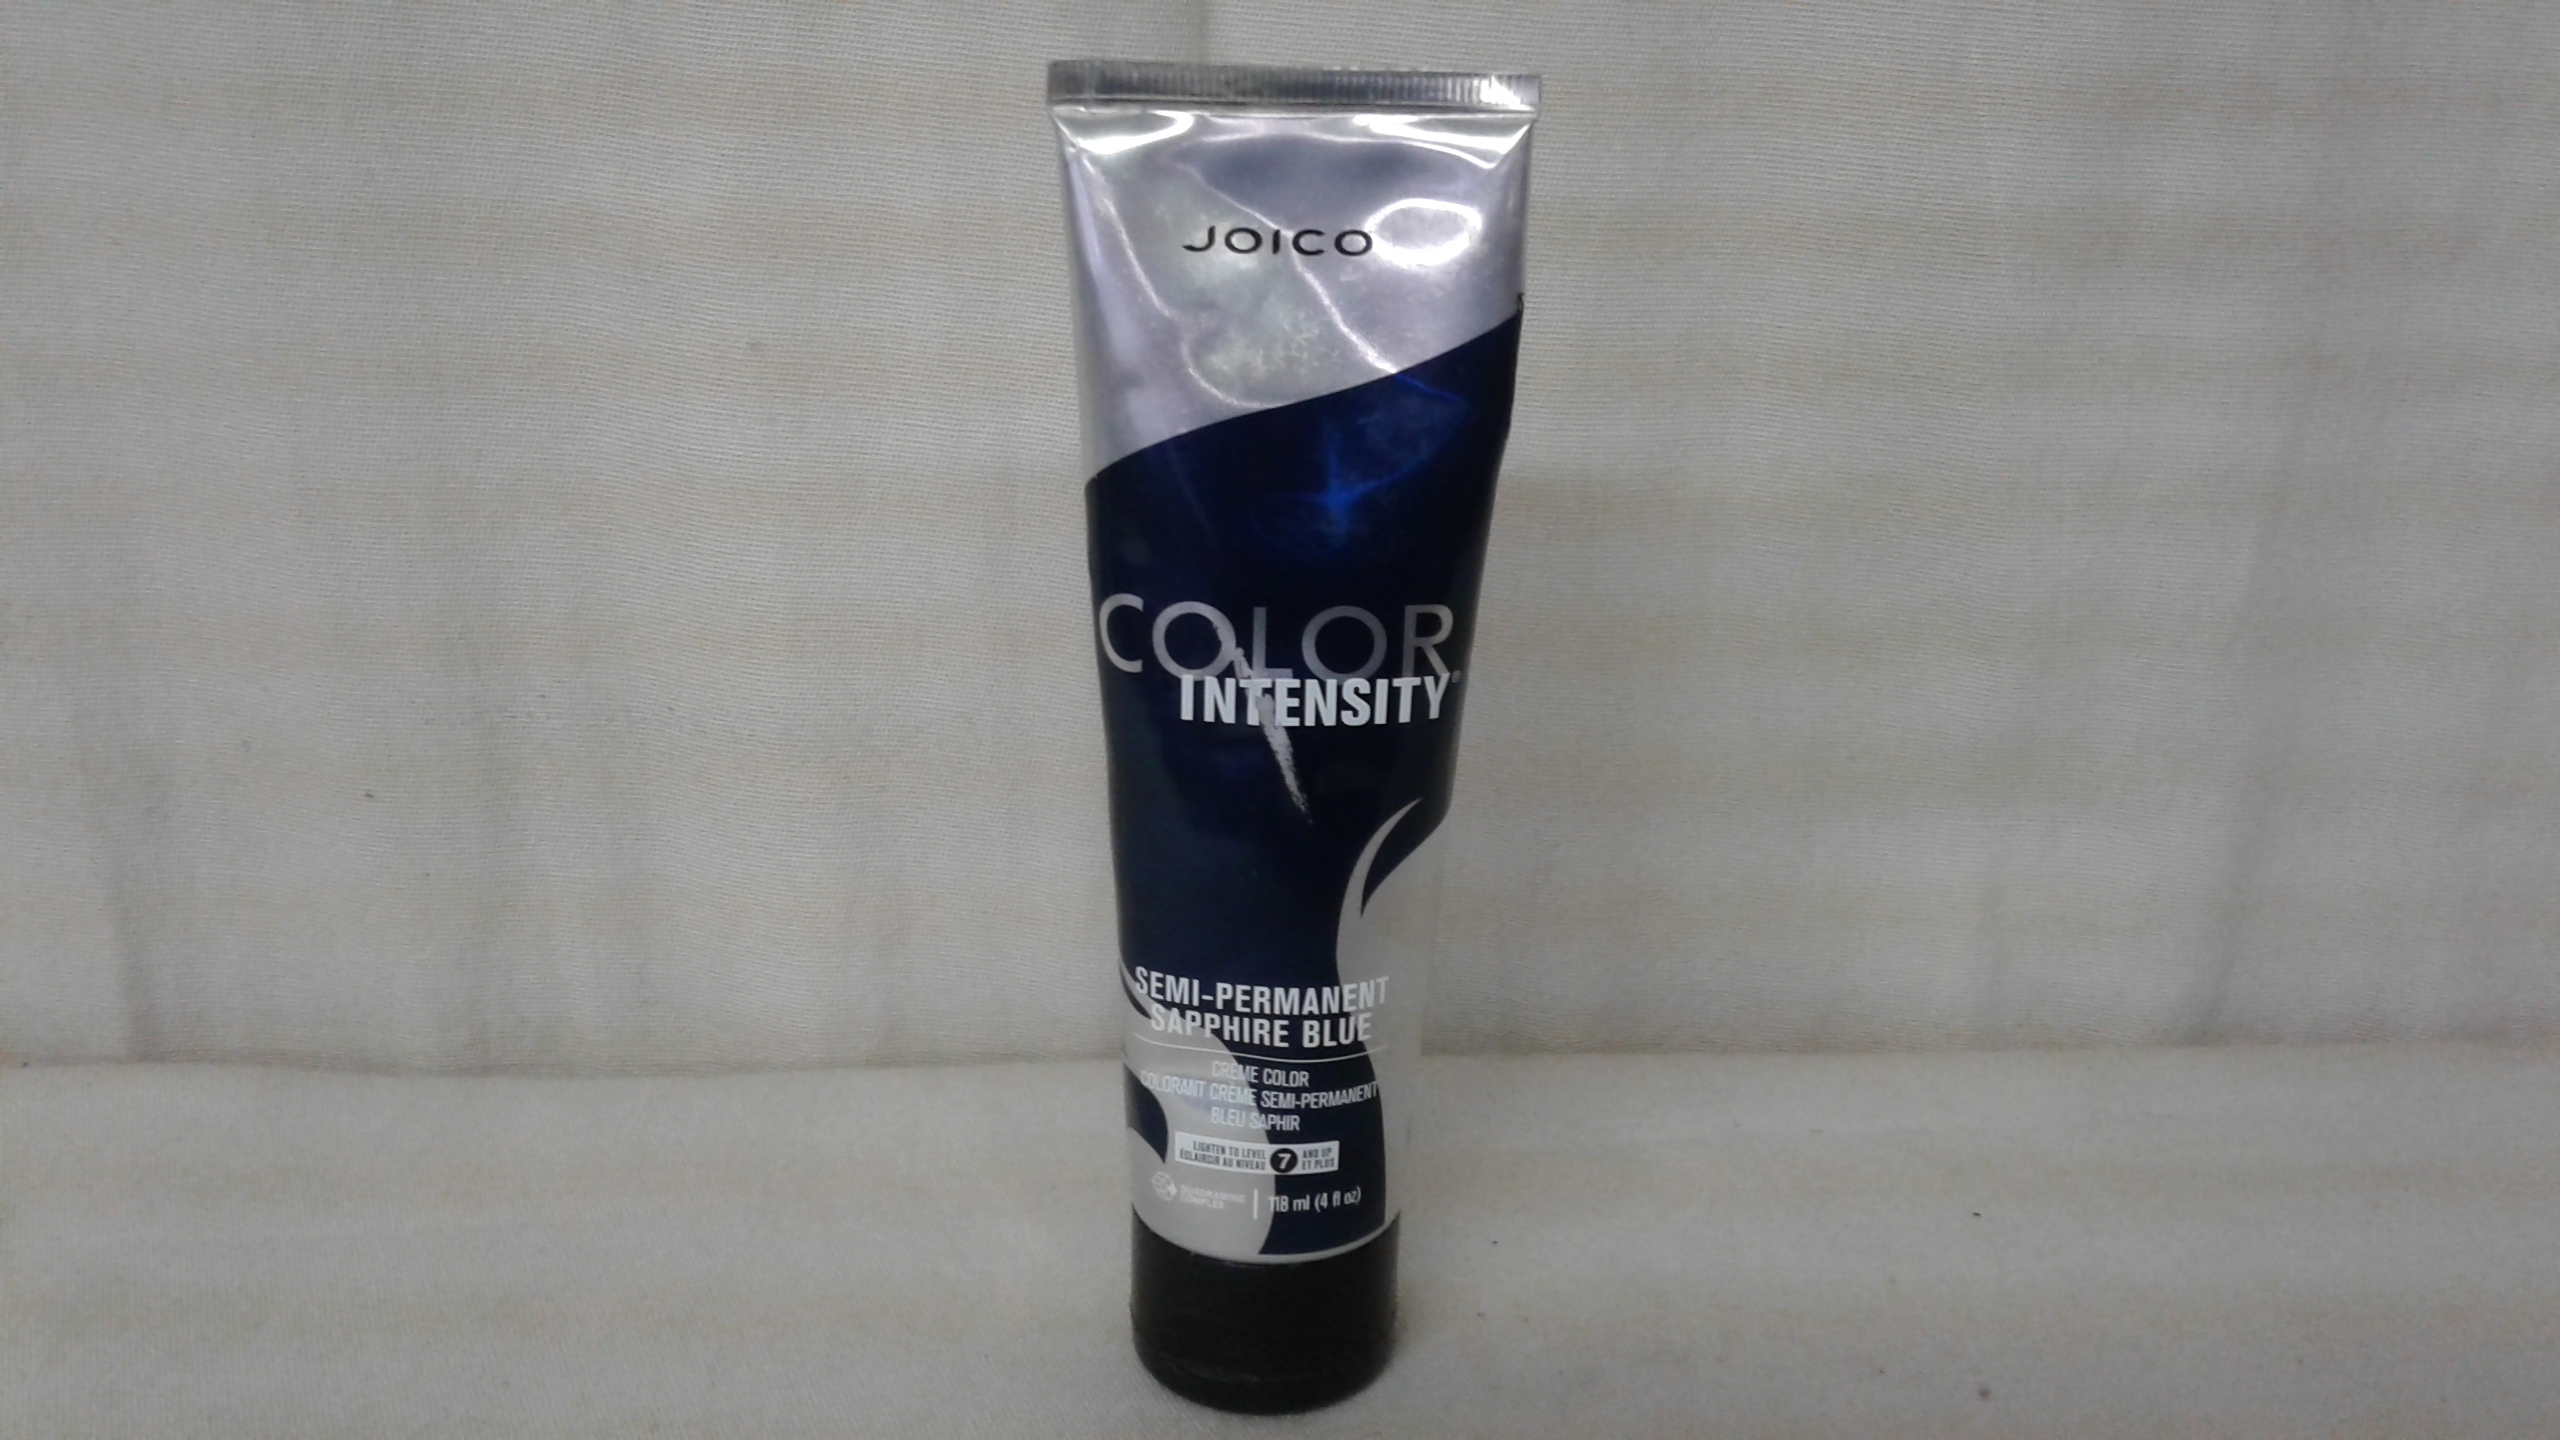 4. Joico Intensity Semi-Permanent Hair Color - Sapphire Blue - wide 7